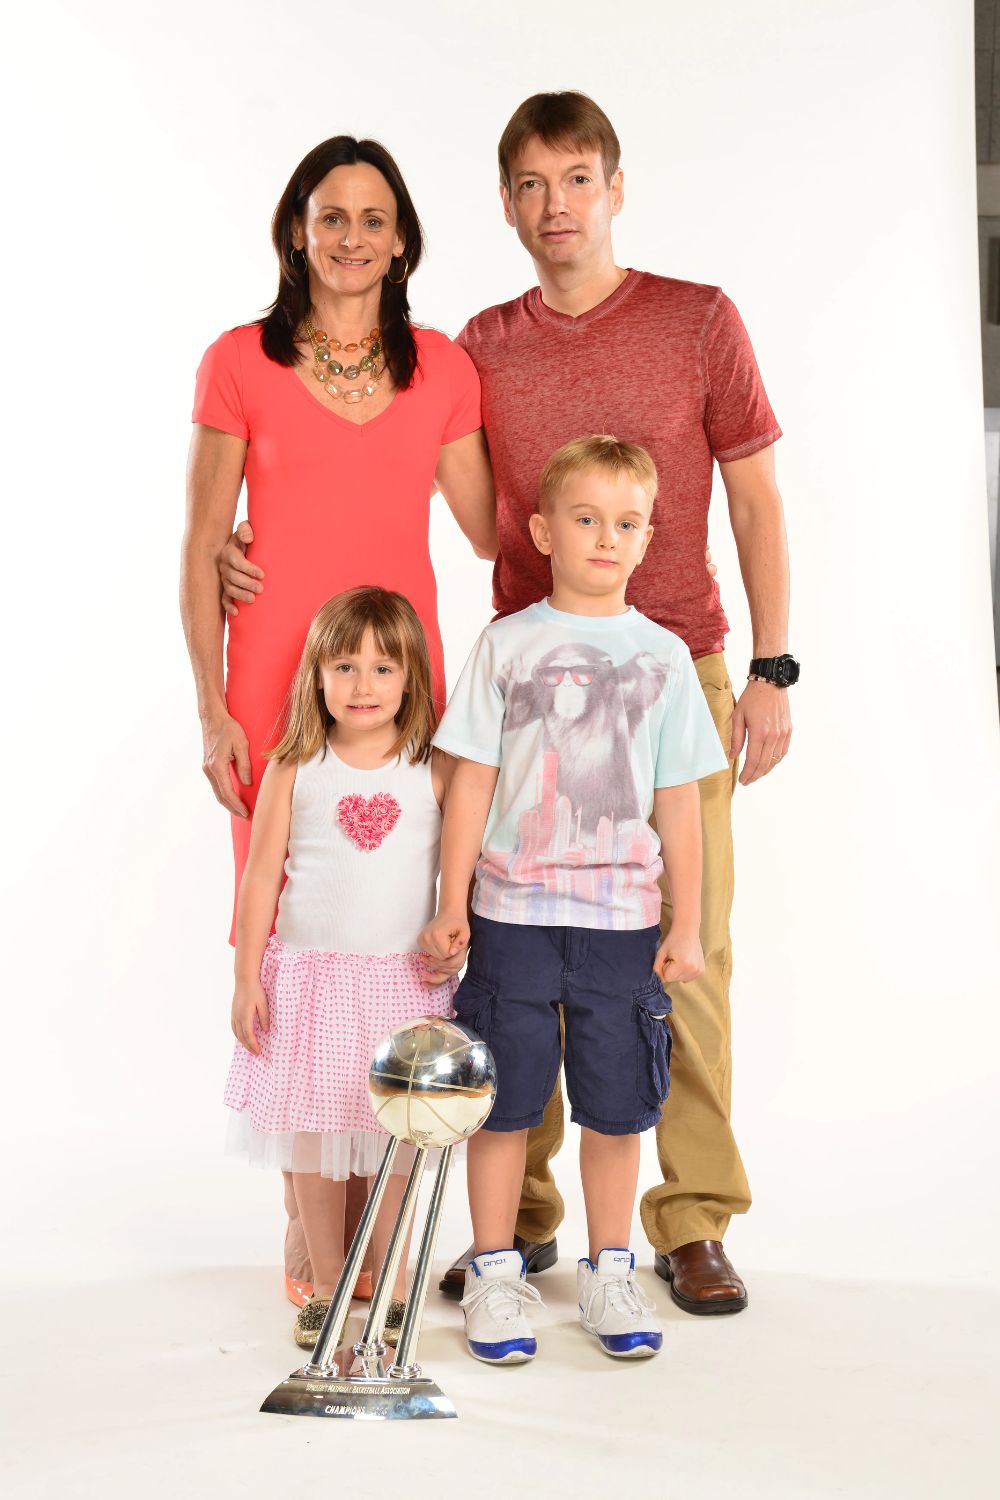 Sandy Brondello With Her Husband Olaf & Two Kids